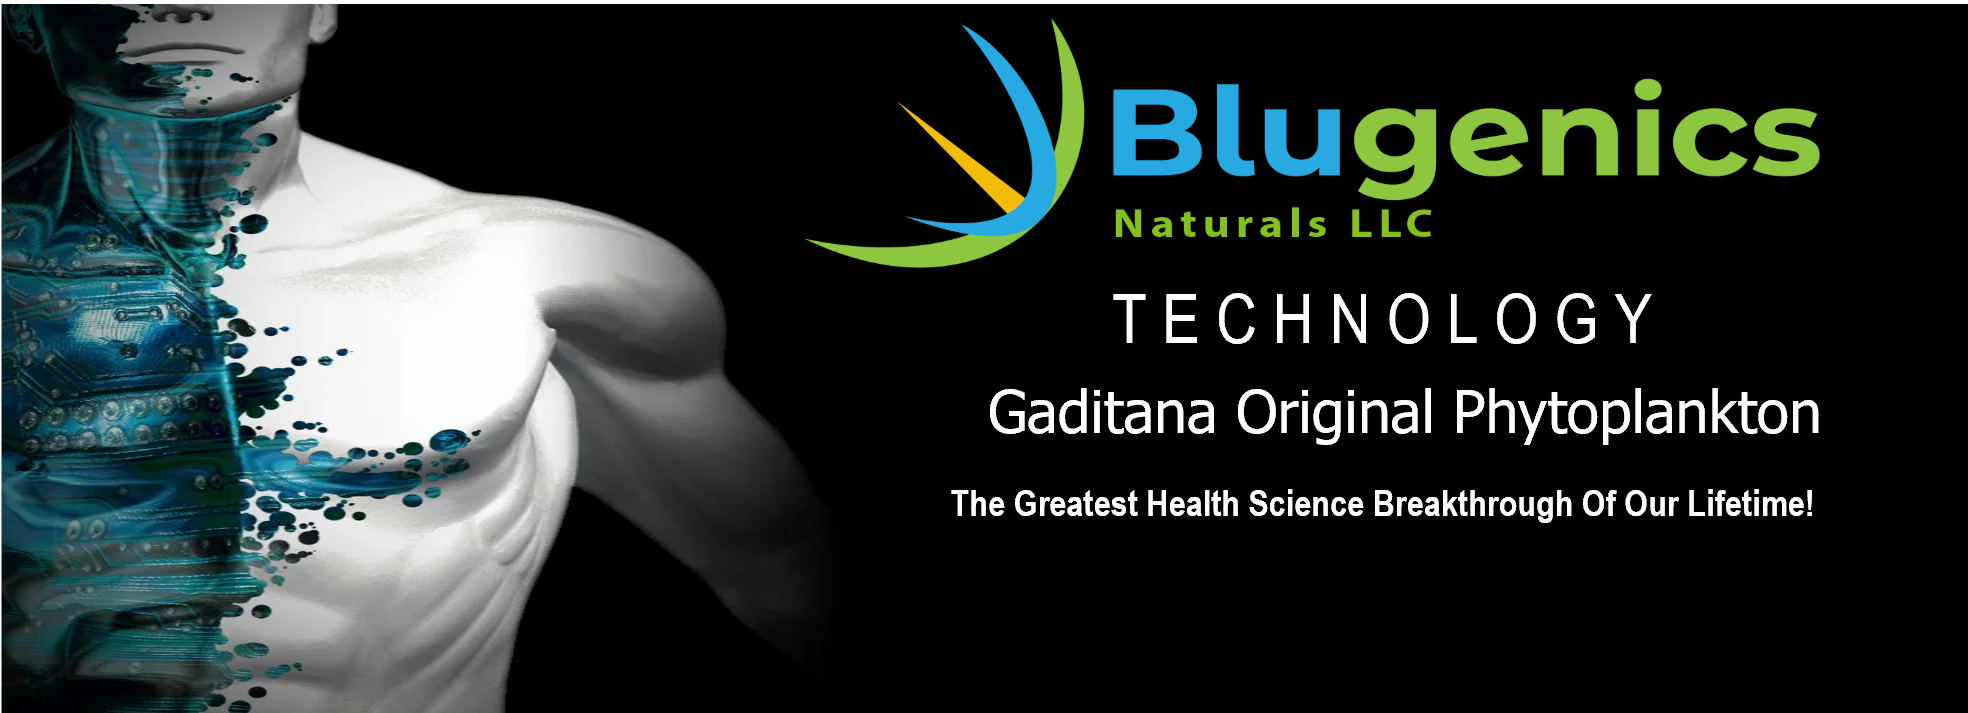 We cultivate Gaditana Original in a state-of-the-art garden. Rest assured, you'r Gaditana Original is NEVER harvested from the ocean, and is guarenteed to not only be the safest algae product in the world, but also the most effective.